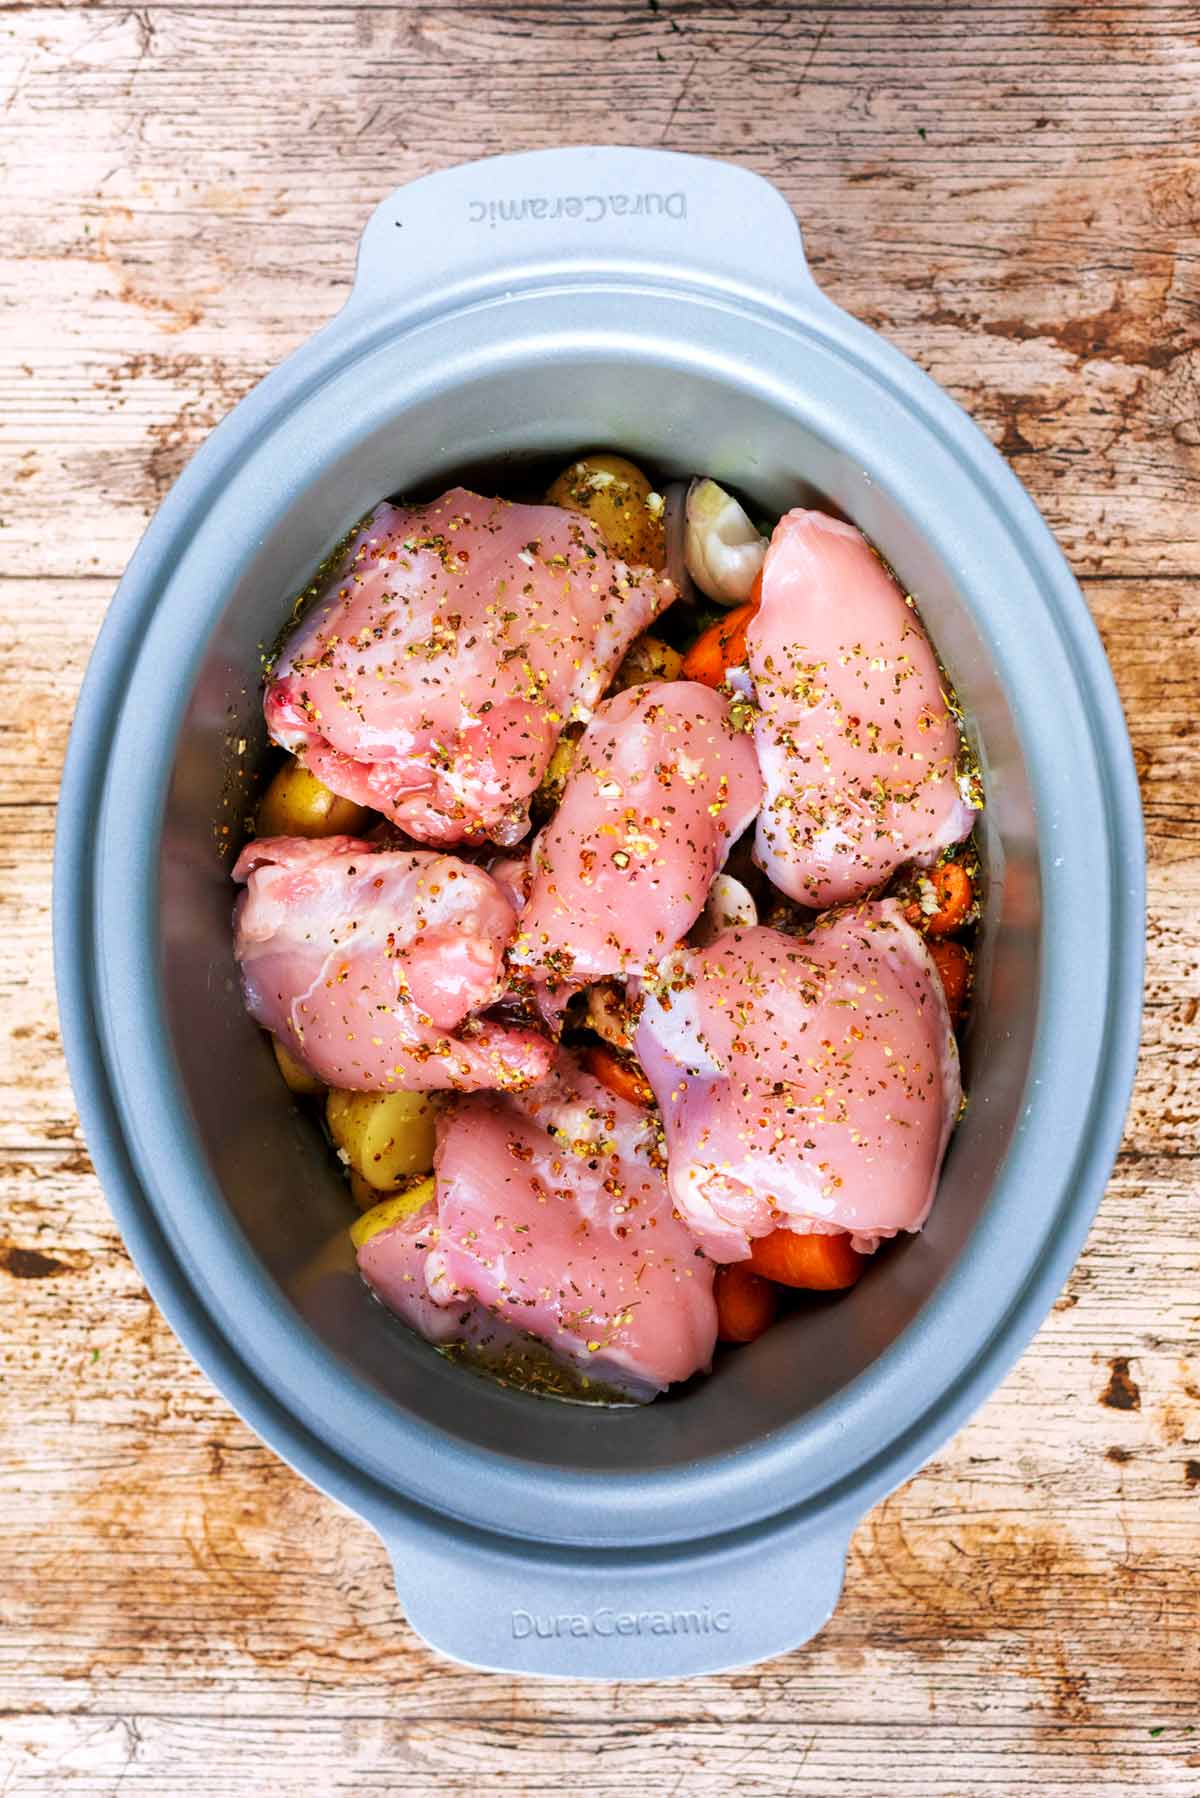 Chicken and vegetables in a slow cooker with stock and herbs.